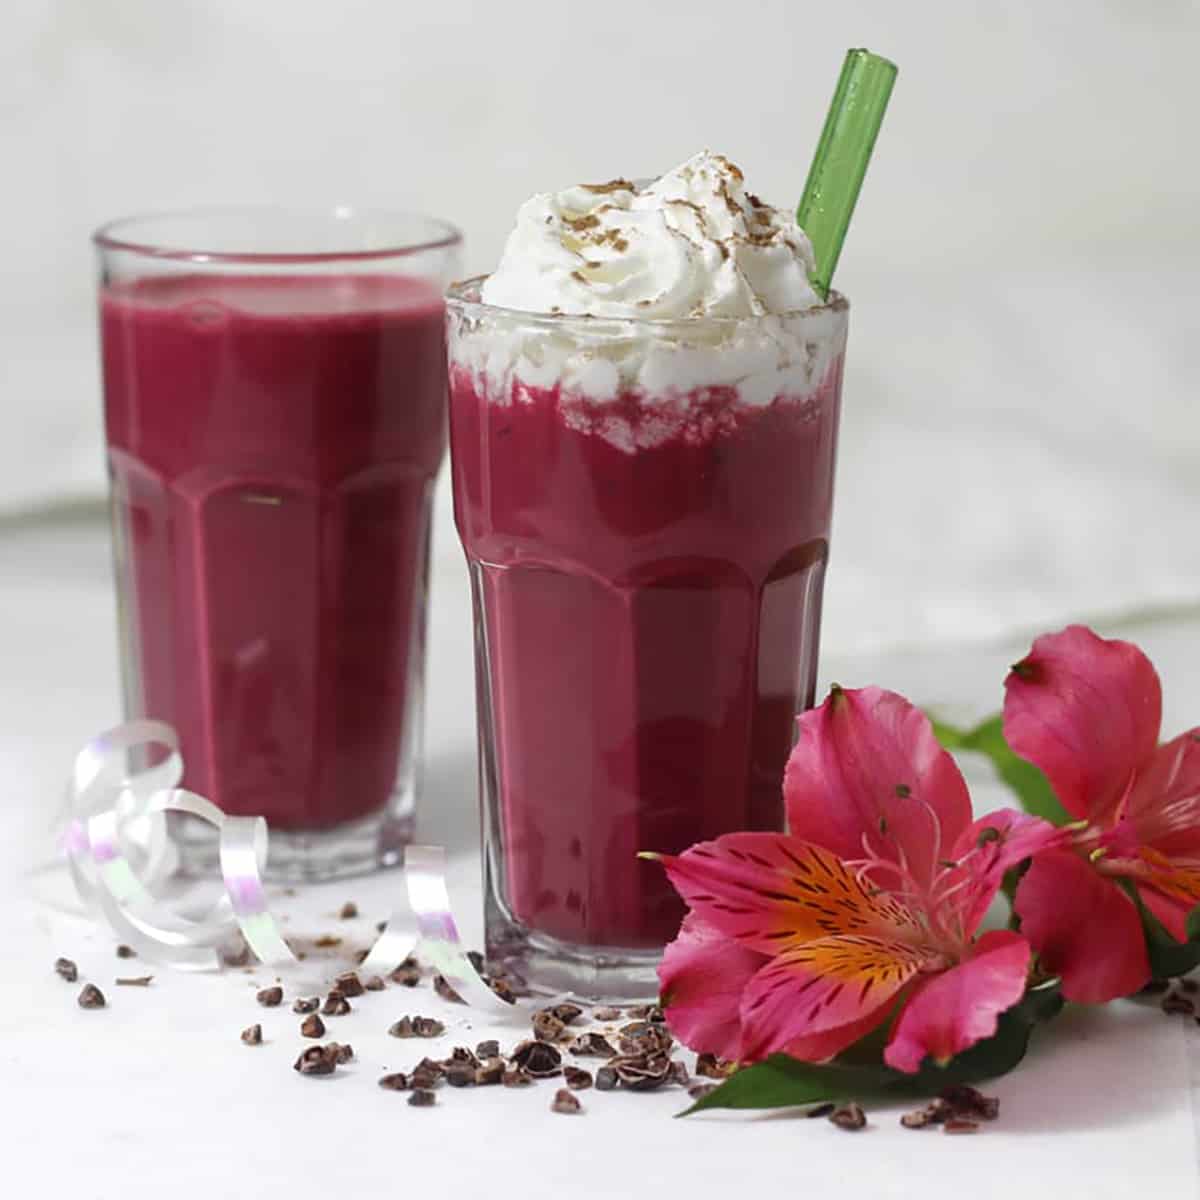 beet chocolate smoothie and a flower.